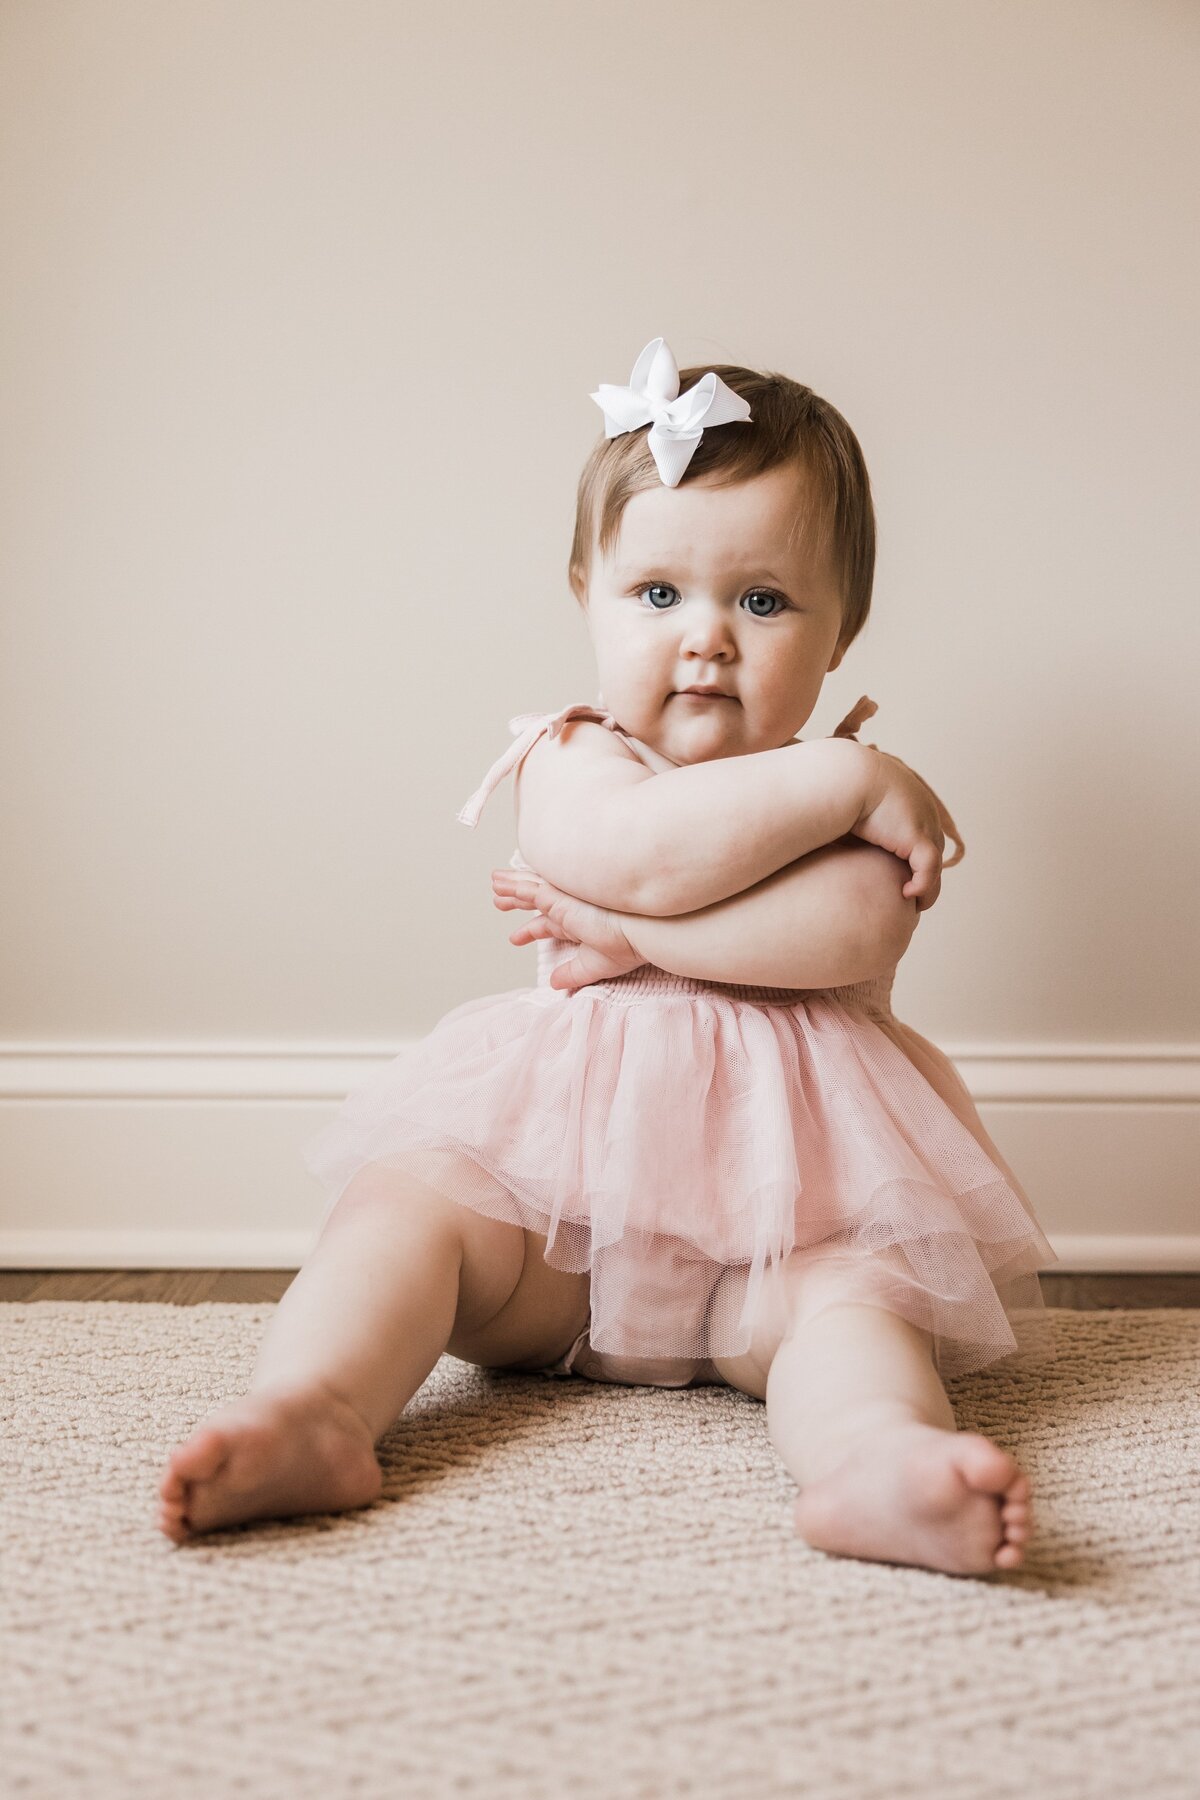 A baby girl wearing a pink tutu and a white bow headband sits on a carpeted floor, ready for her session with the family photographer in Pittsburgh, PA.